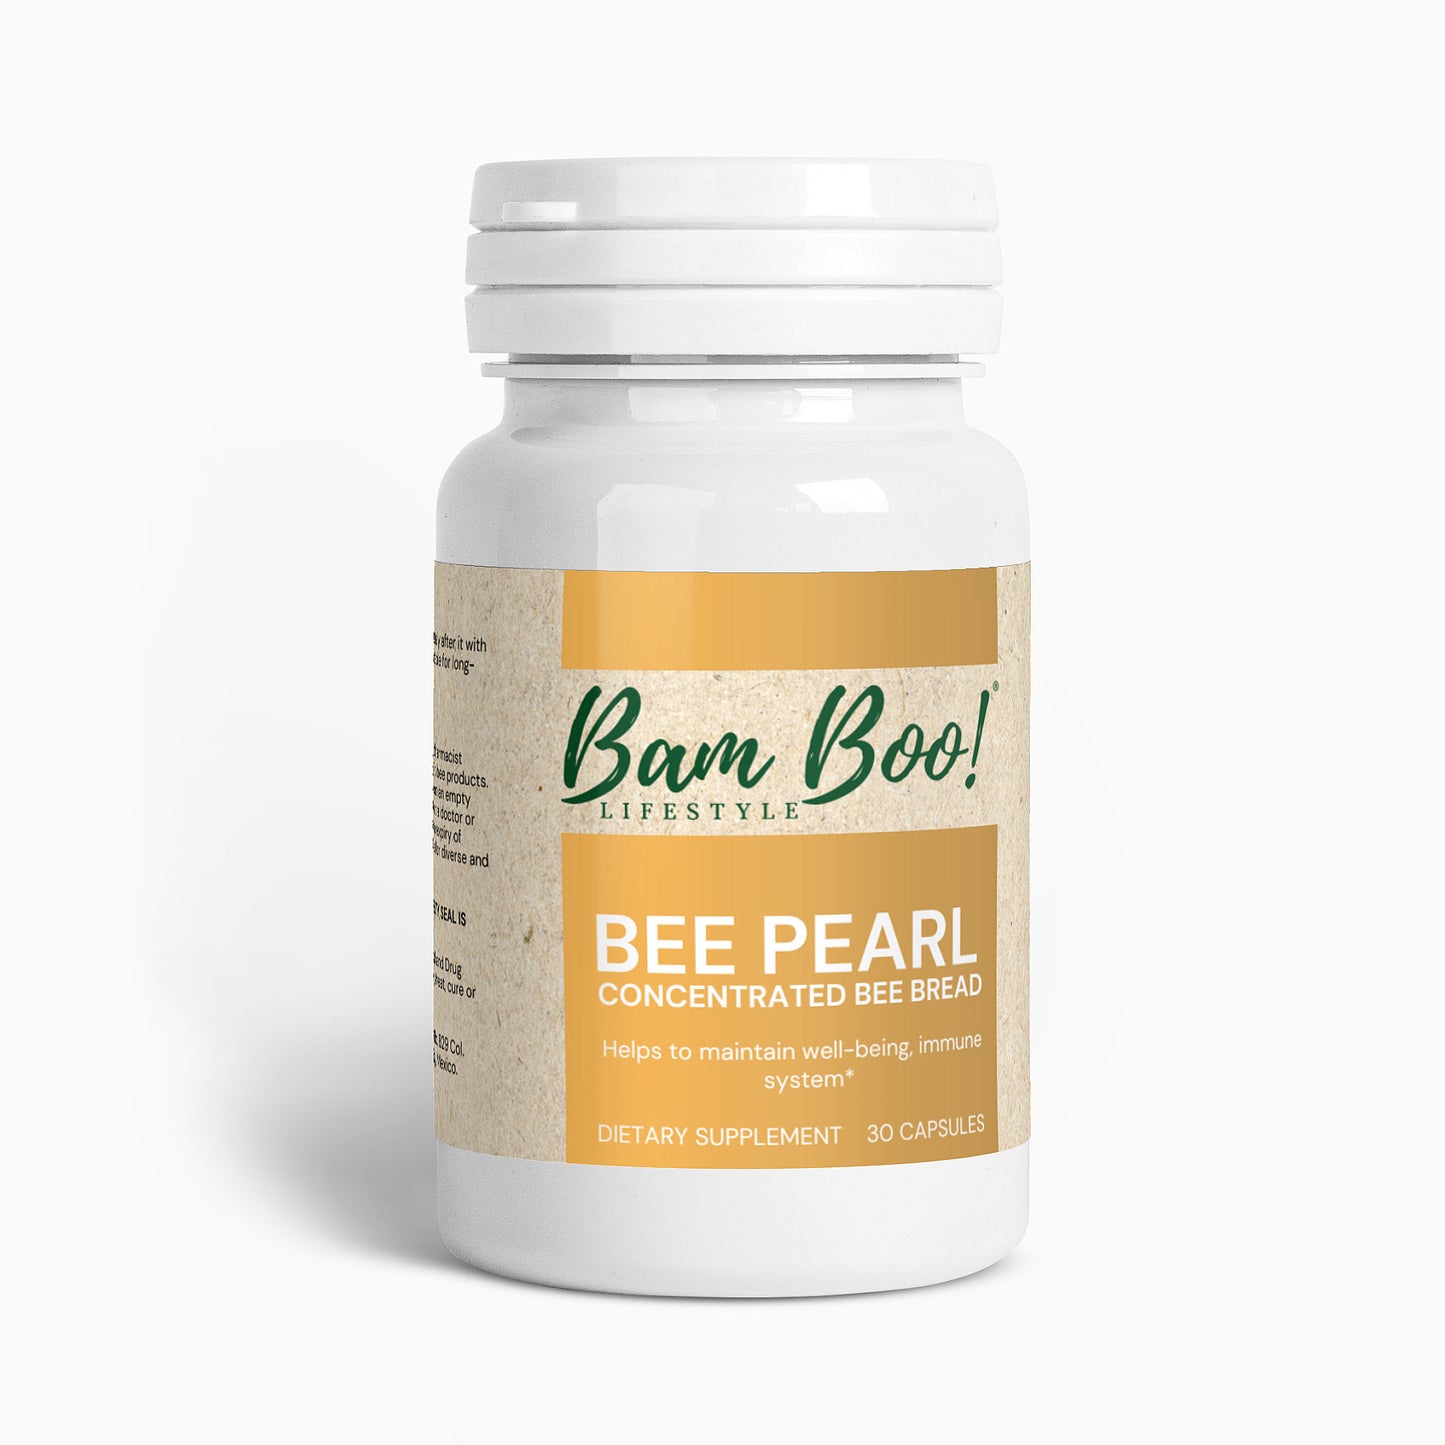 Bee Pearl 30 Capsules Bam Boo! Lifestyle Vitamins & Supplements